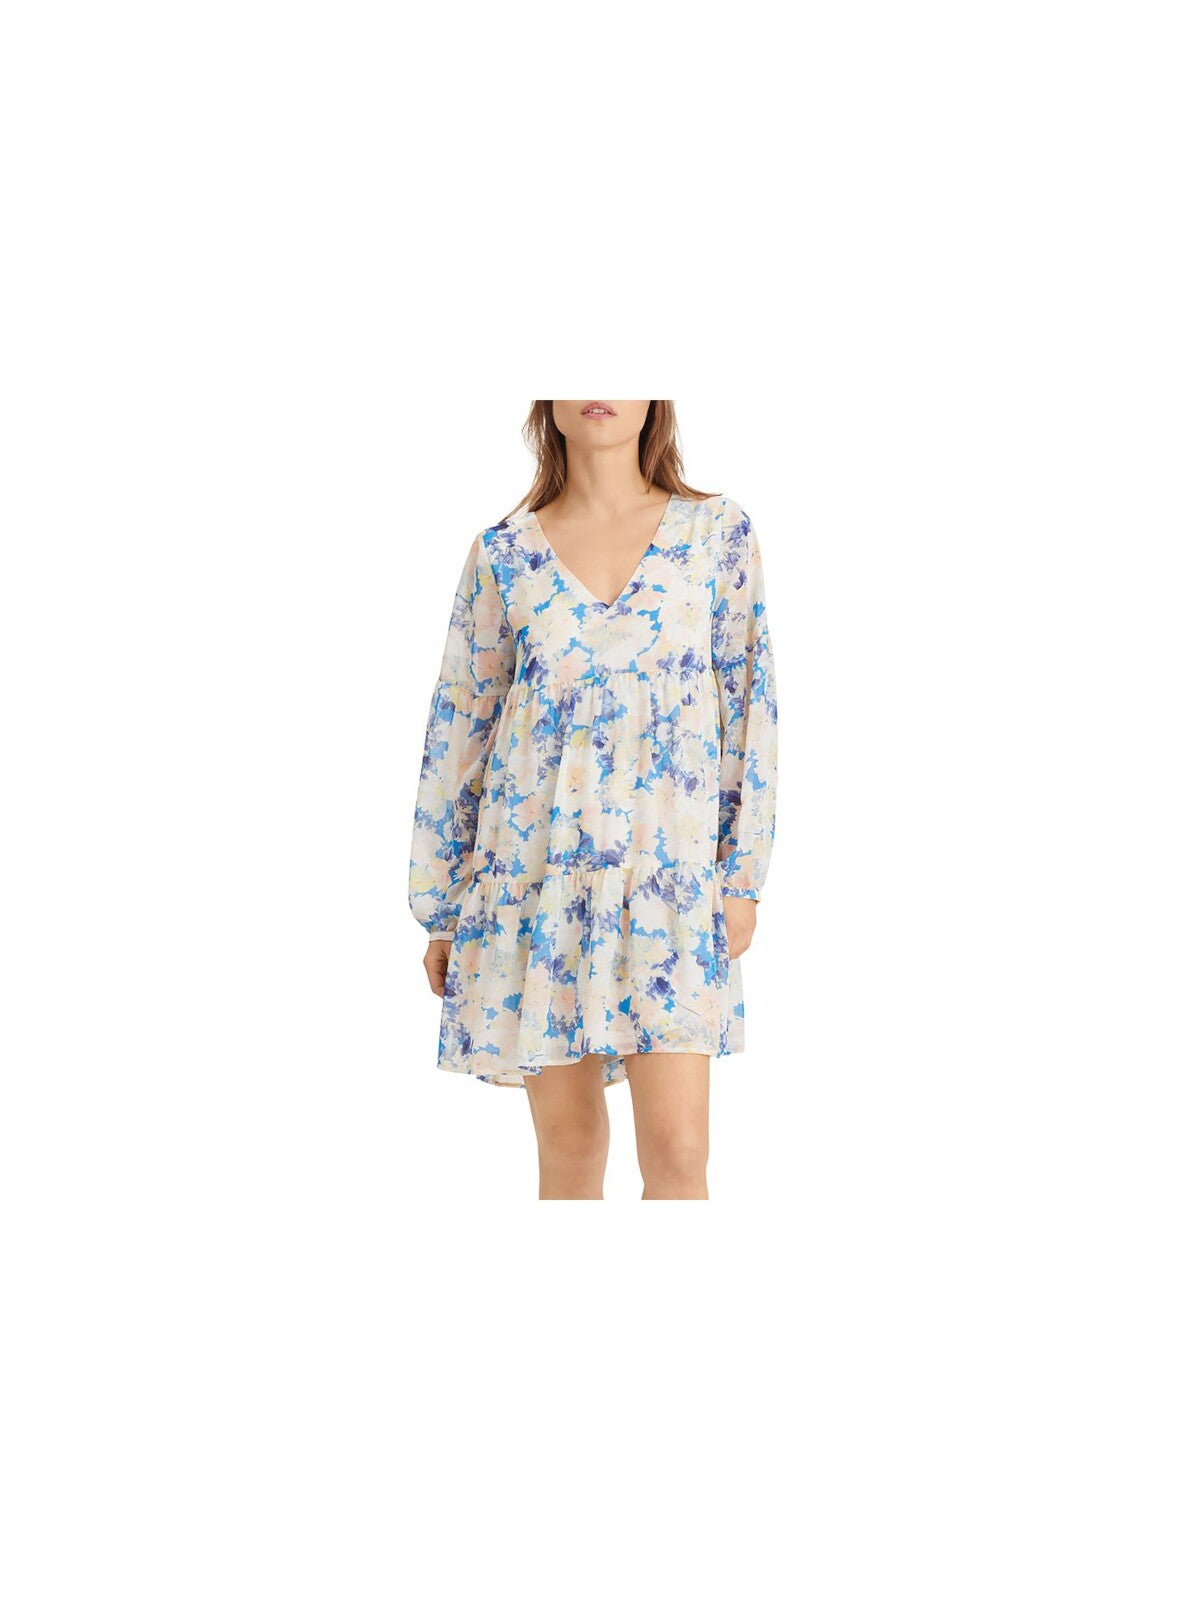 SANCTUARY Womens Light Blue Sheer Pull-on Style Lined Floral Long Sleeve V Neck Above The Knee Party Baby Doll Dress 2